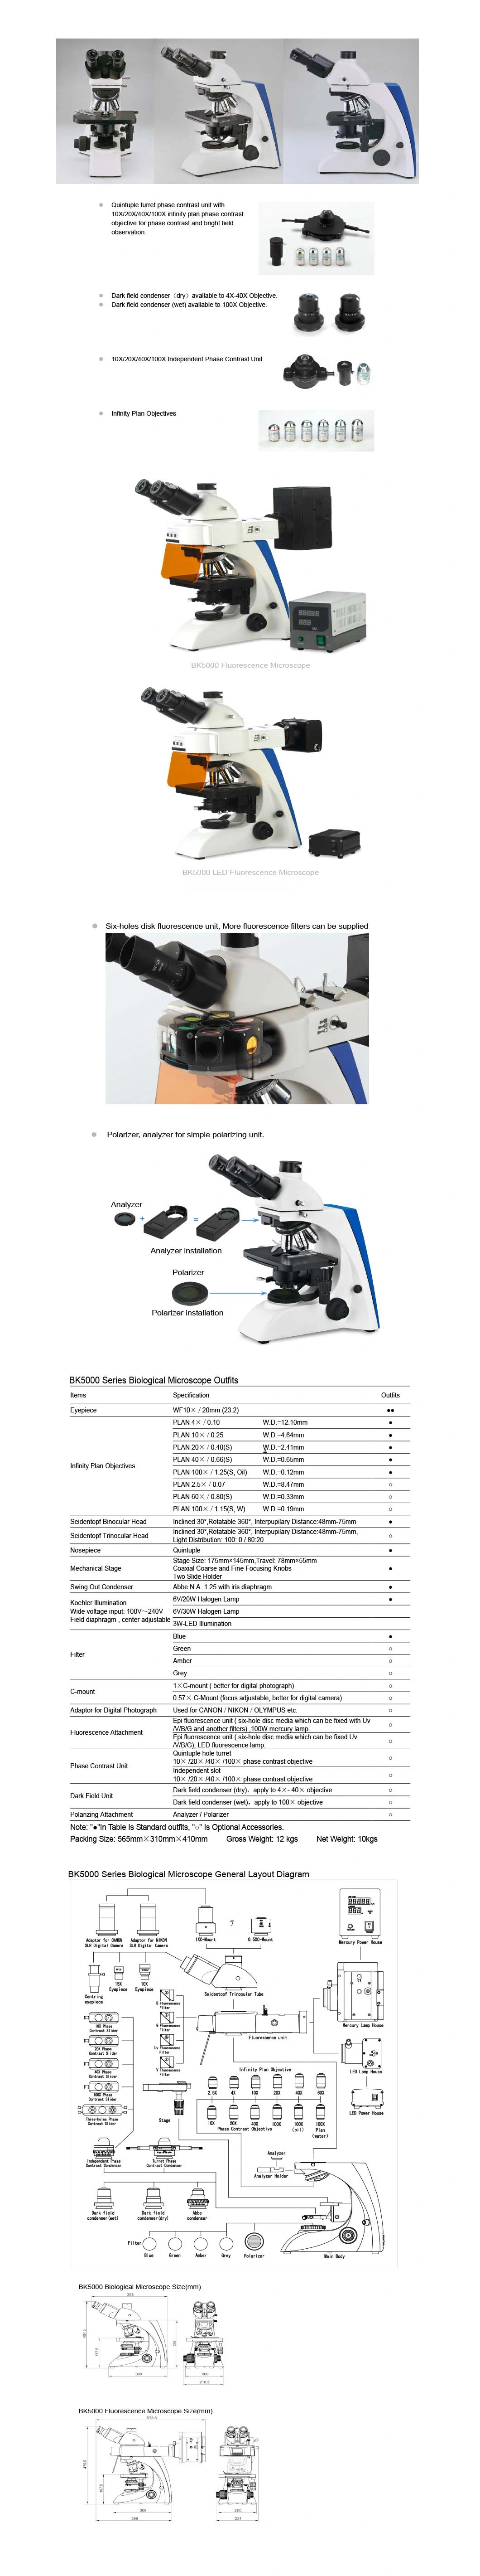 High Quality Binocular Microscope Fluorescence for Students Use